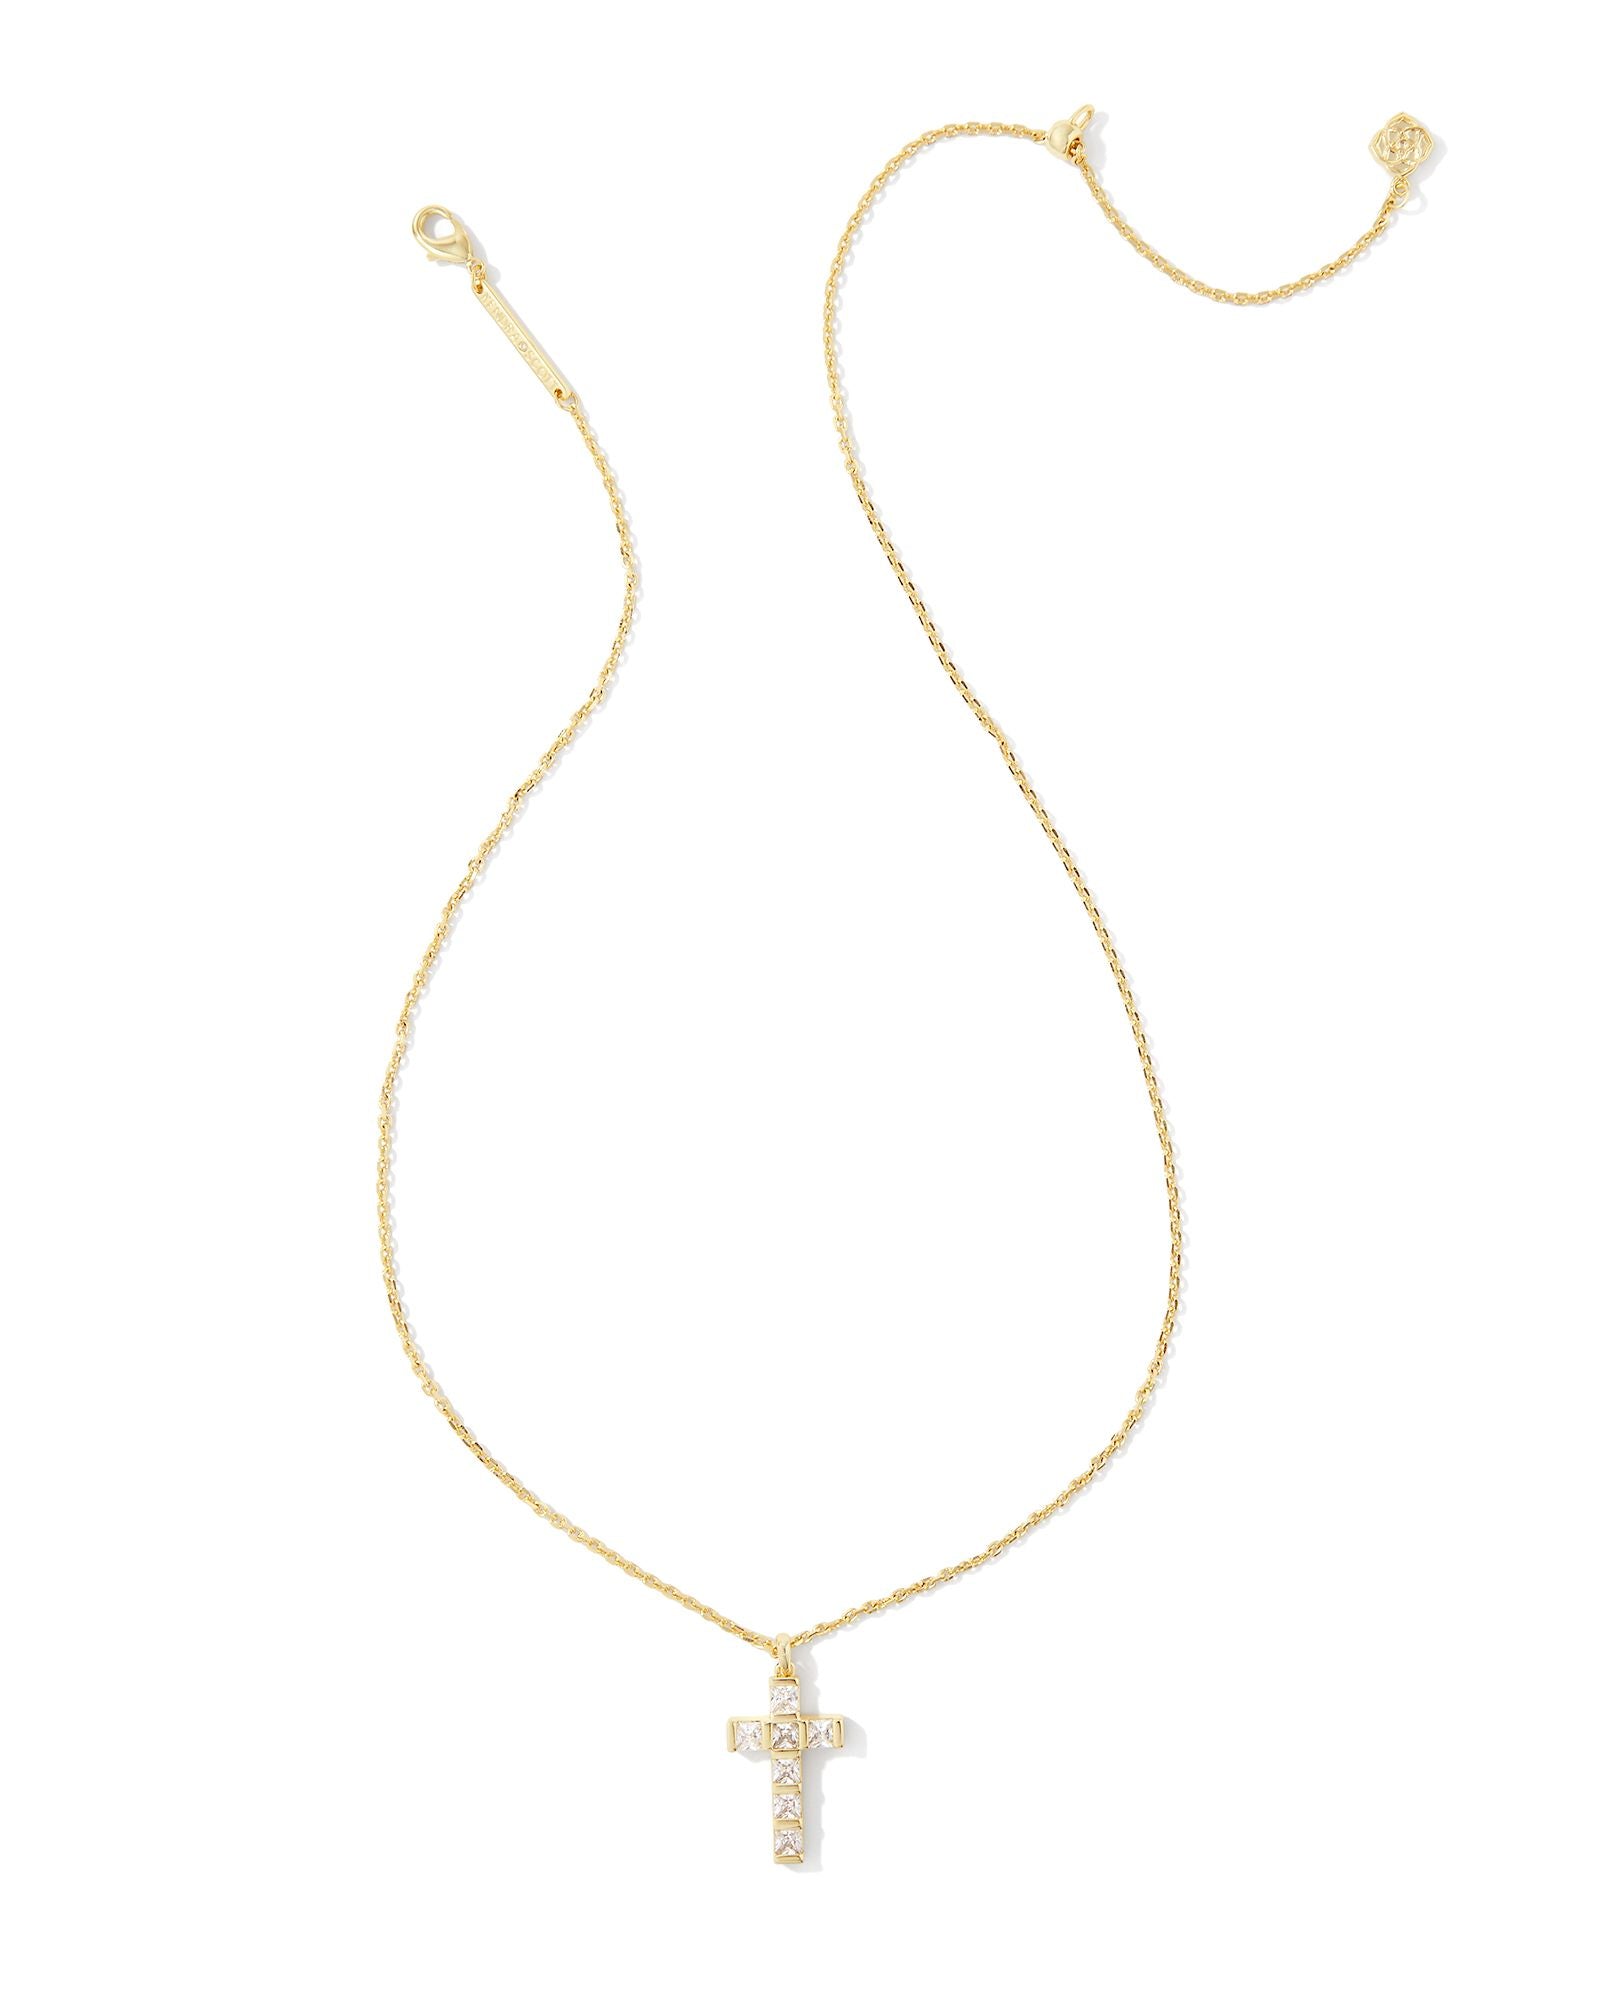 Gracie Cross Pendant Necklace Gold White Crystals